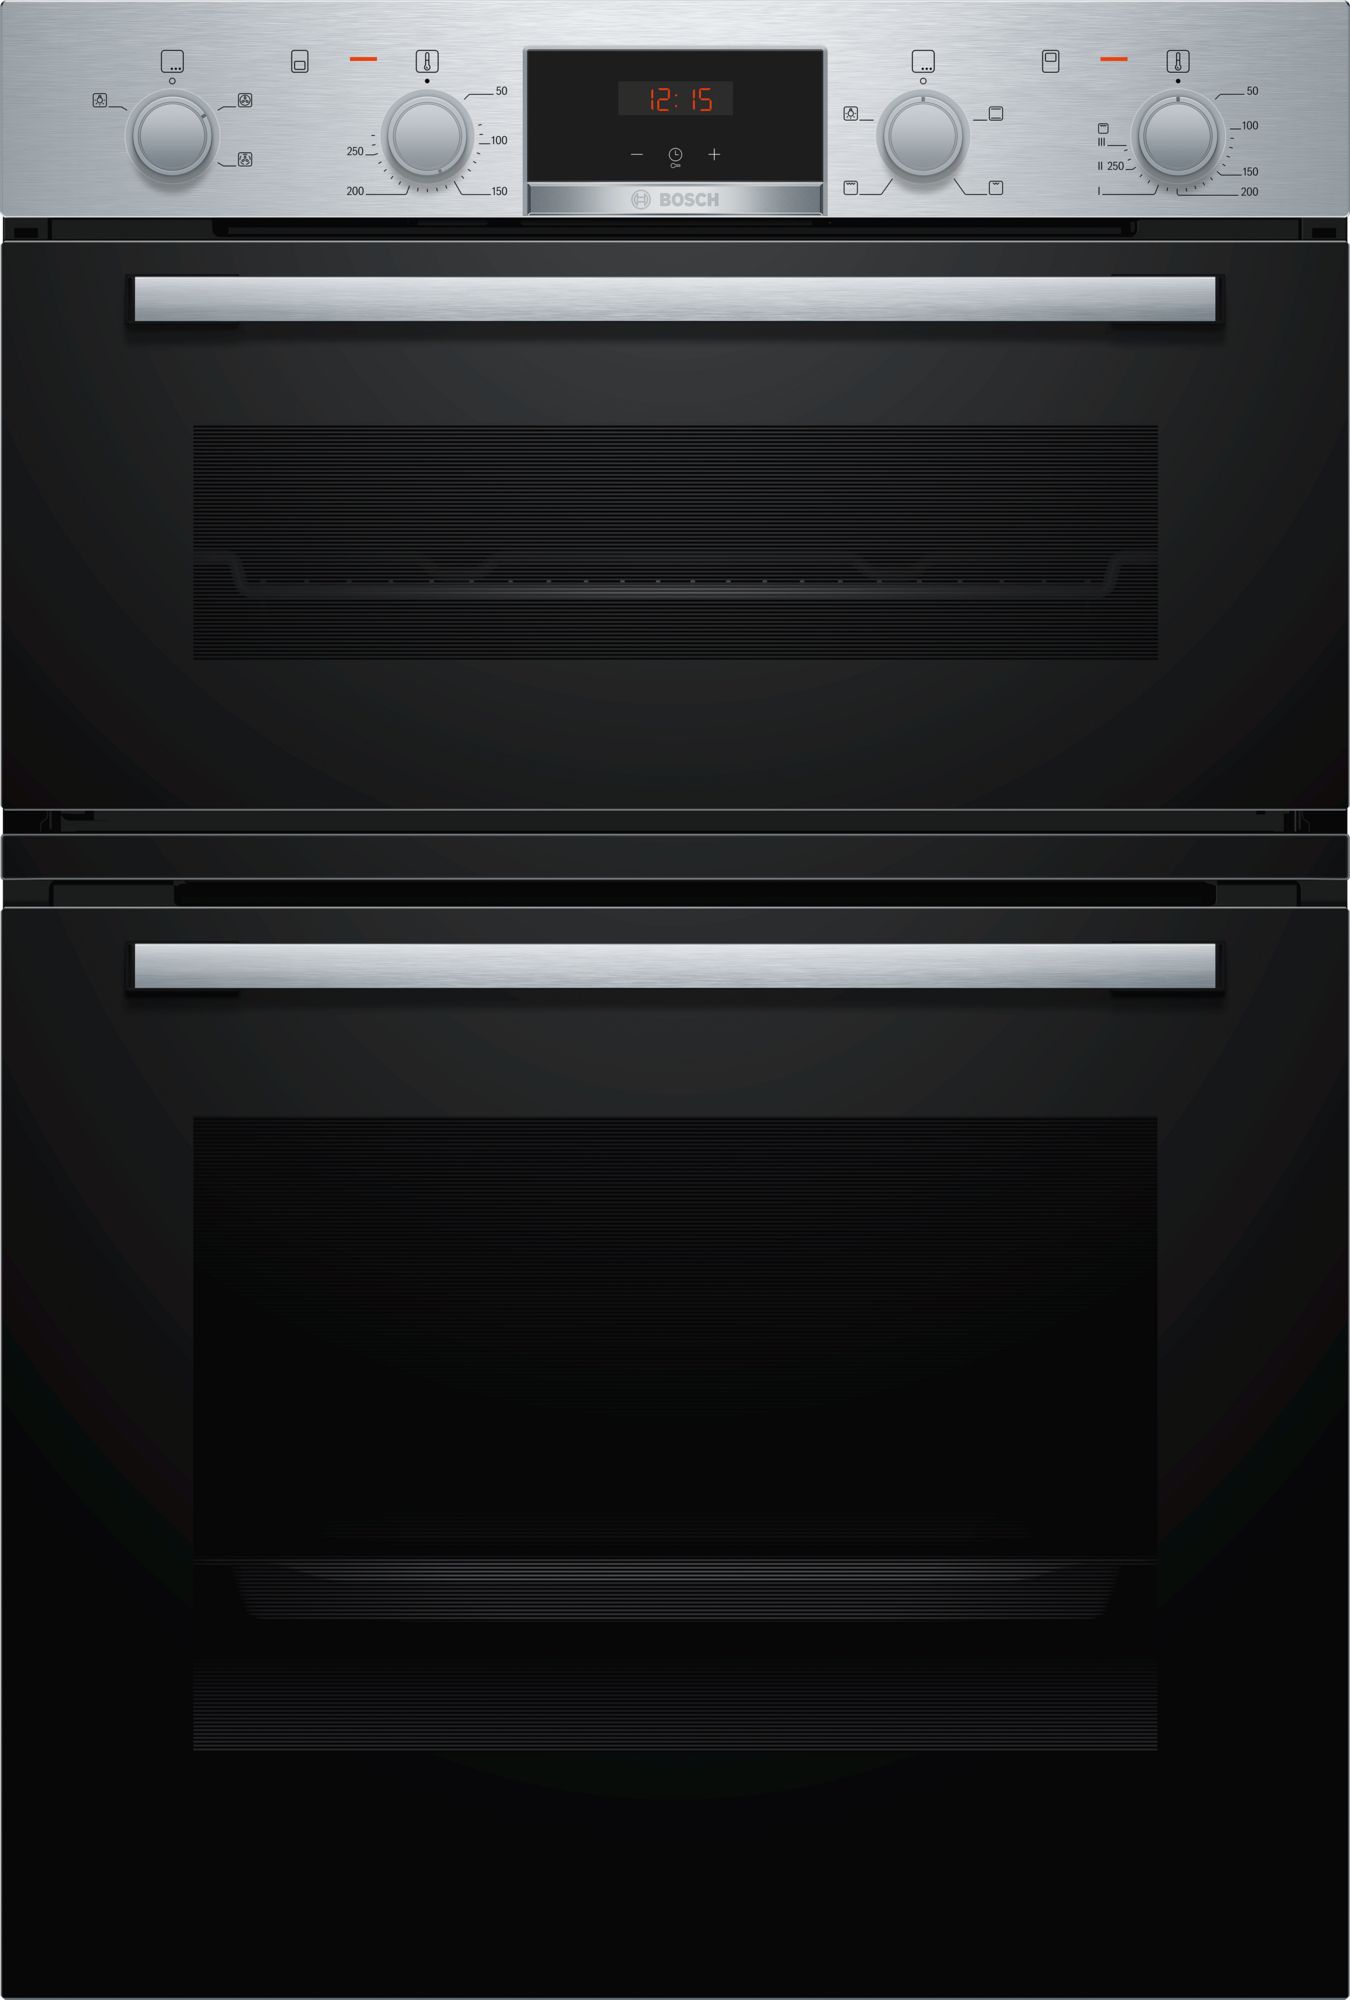 MHA133BR0B Bosch Double Oven Image